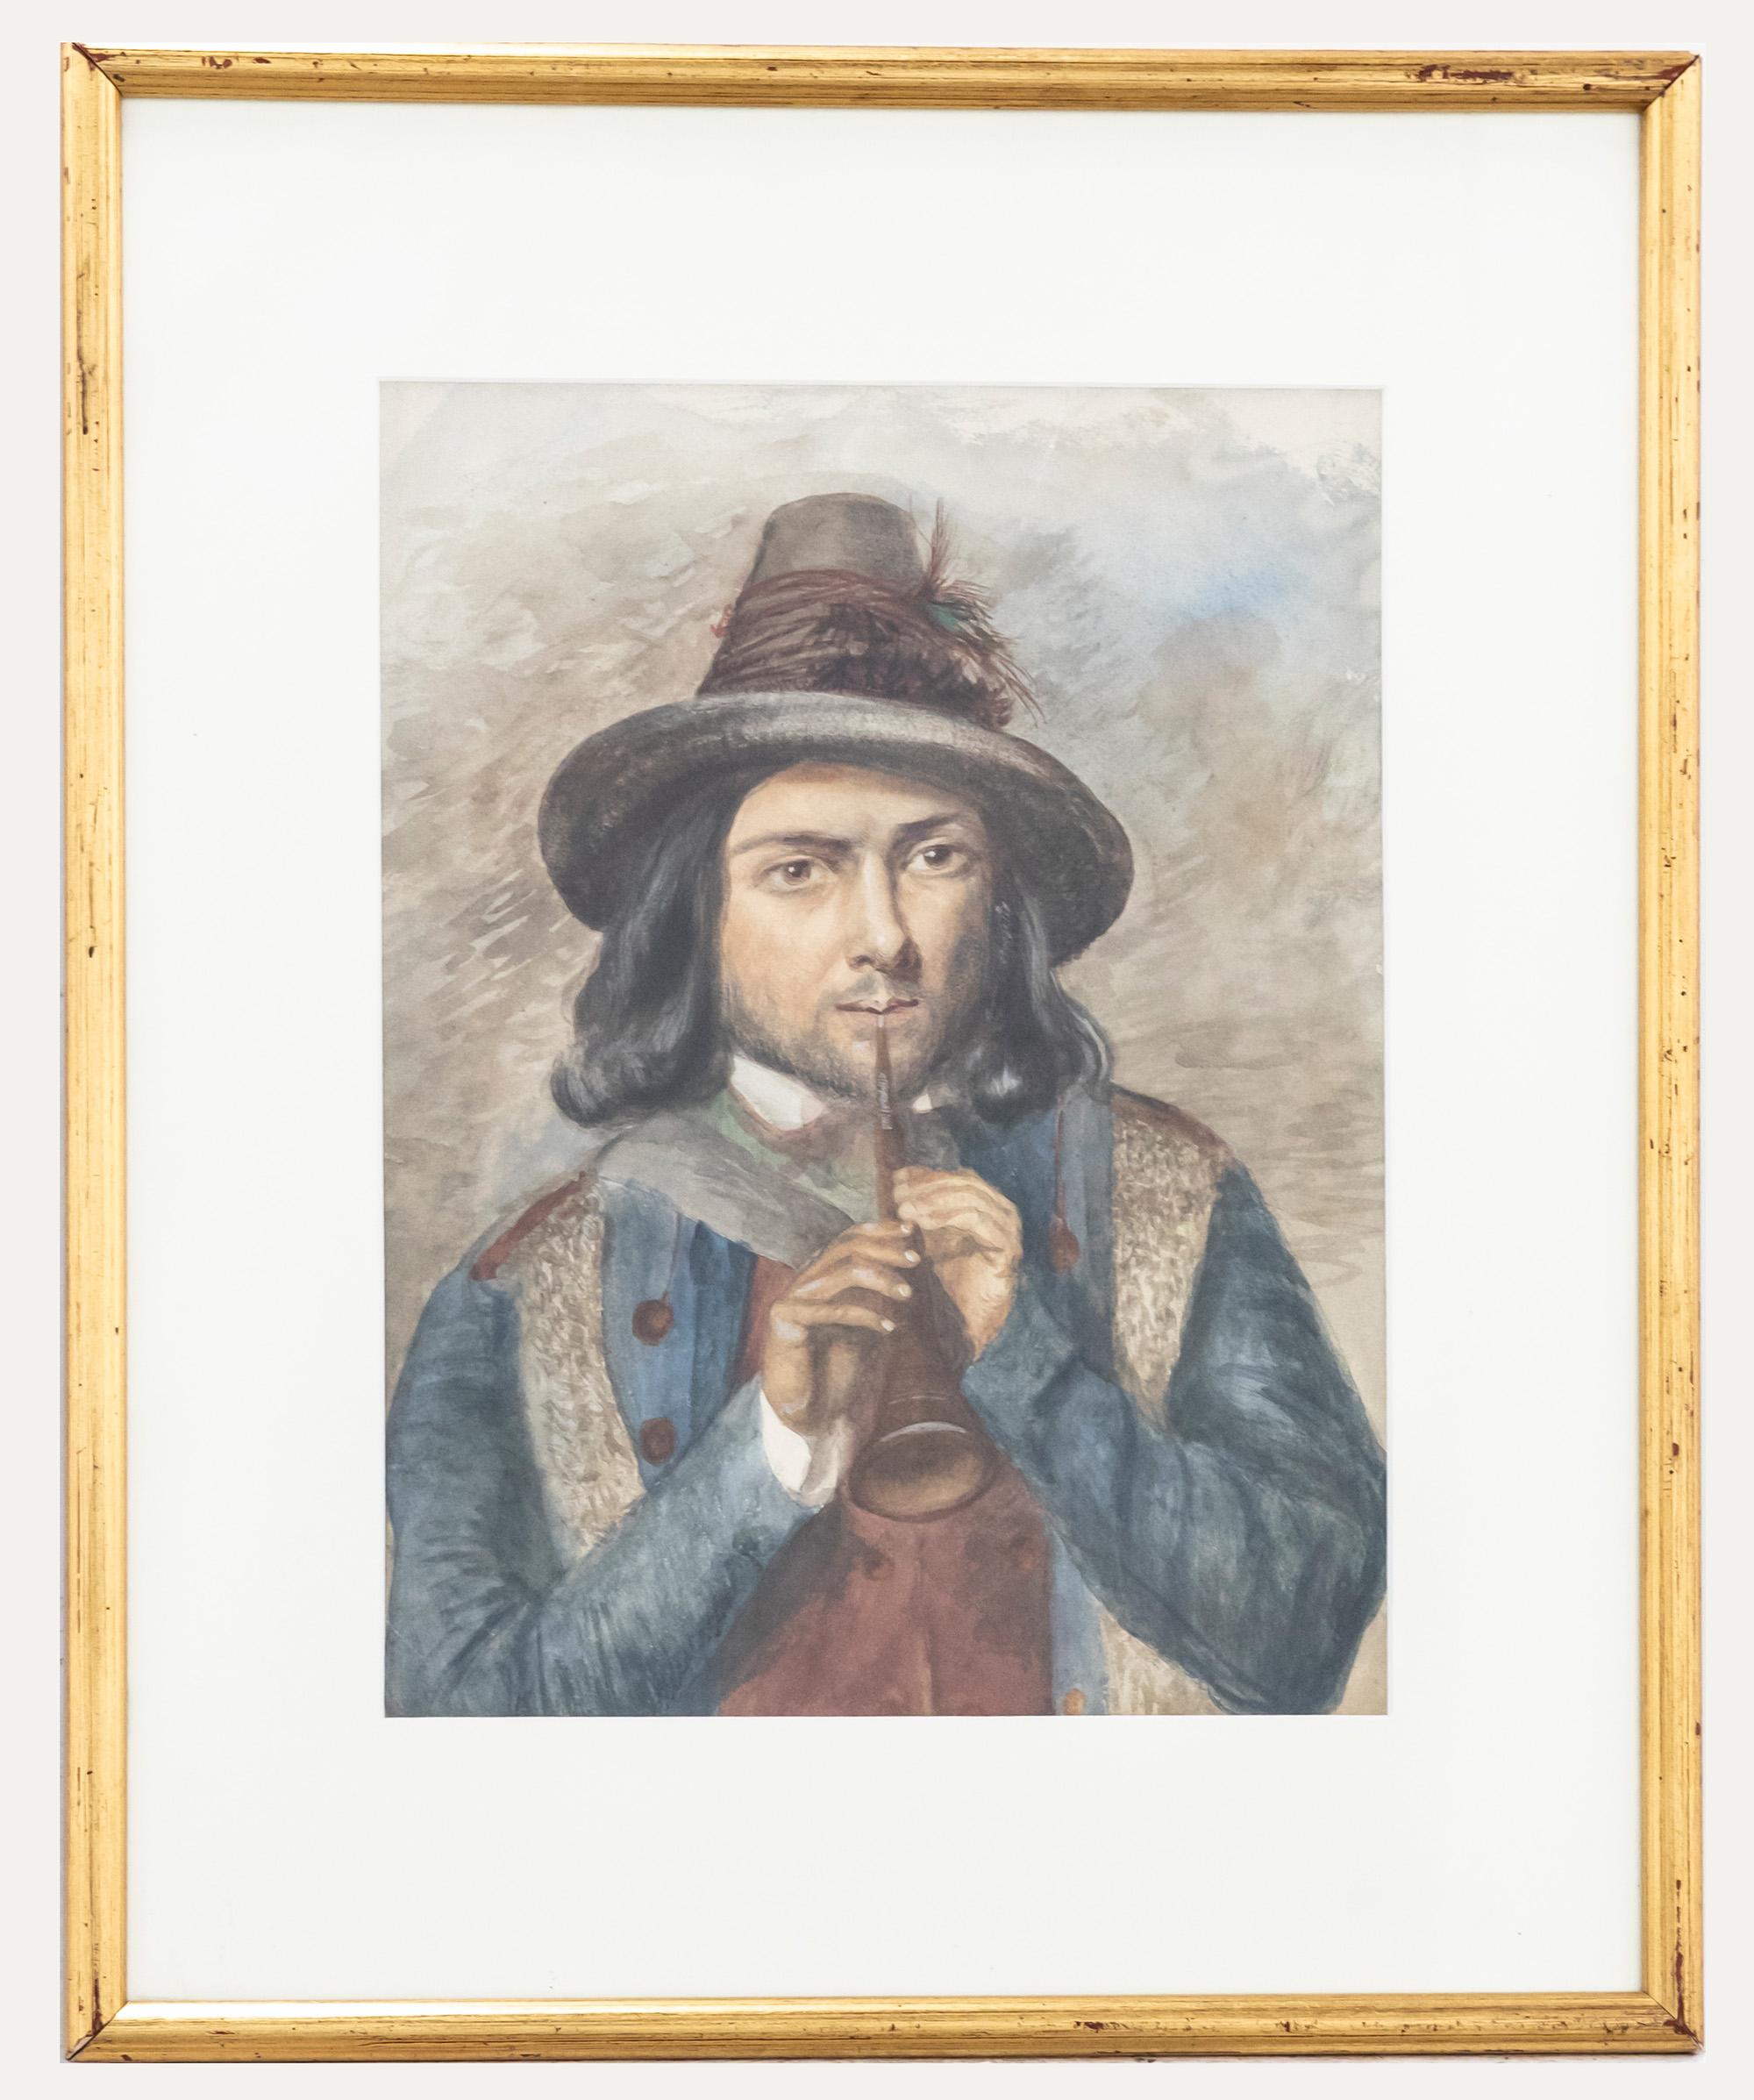 Unknown Portrait - Early 20th Century Watercolour - The Minstrel